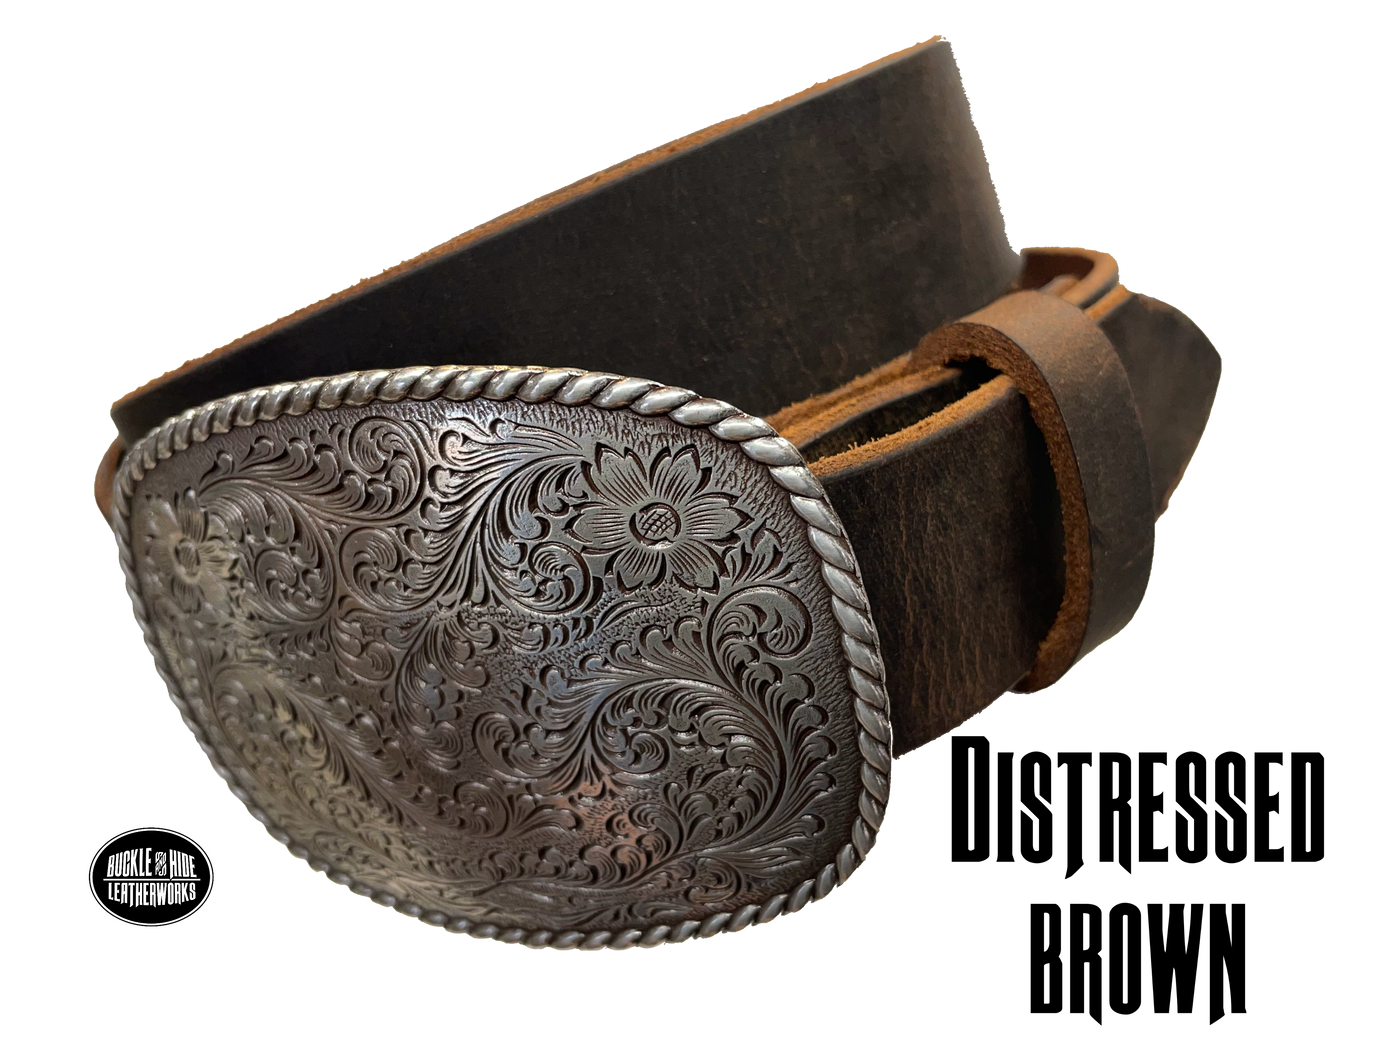 This rectangular shaped buckle by Nocona has rounded edges with rope design around the border. It is chrome colored with scroll design etched appearance on surface.  Measures 2 3/4" tall by 3 3/4" wide and fits belts up to 1 1/2" wide. Buckle is made in Taiwan. Belt is a single strip of leather that is 1 1/2" wide and available in sizes 34" to 44". Colors are distressed brown, black, and dark brown. Distressed brown pictured. Available online and in our retail shop in Smyrna, TN, just outside Nashville.